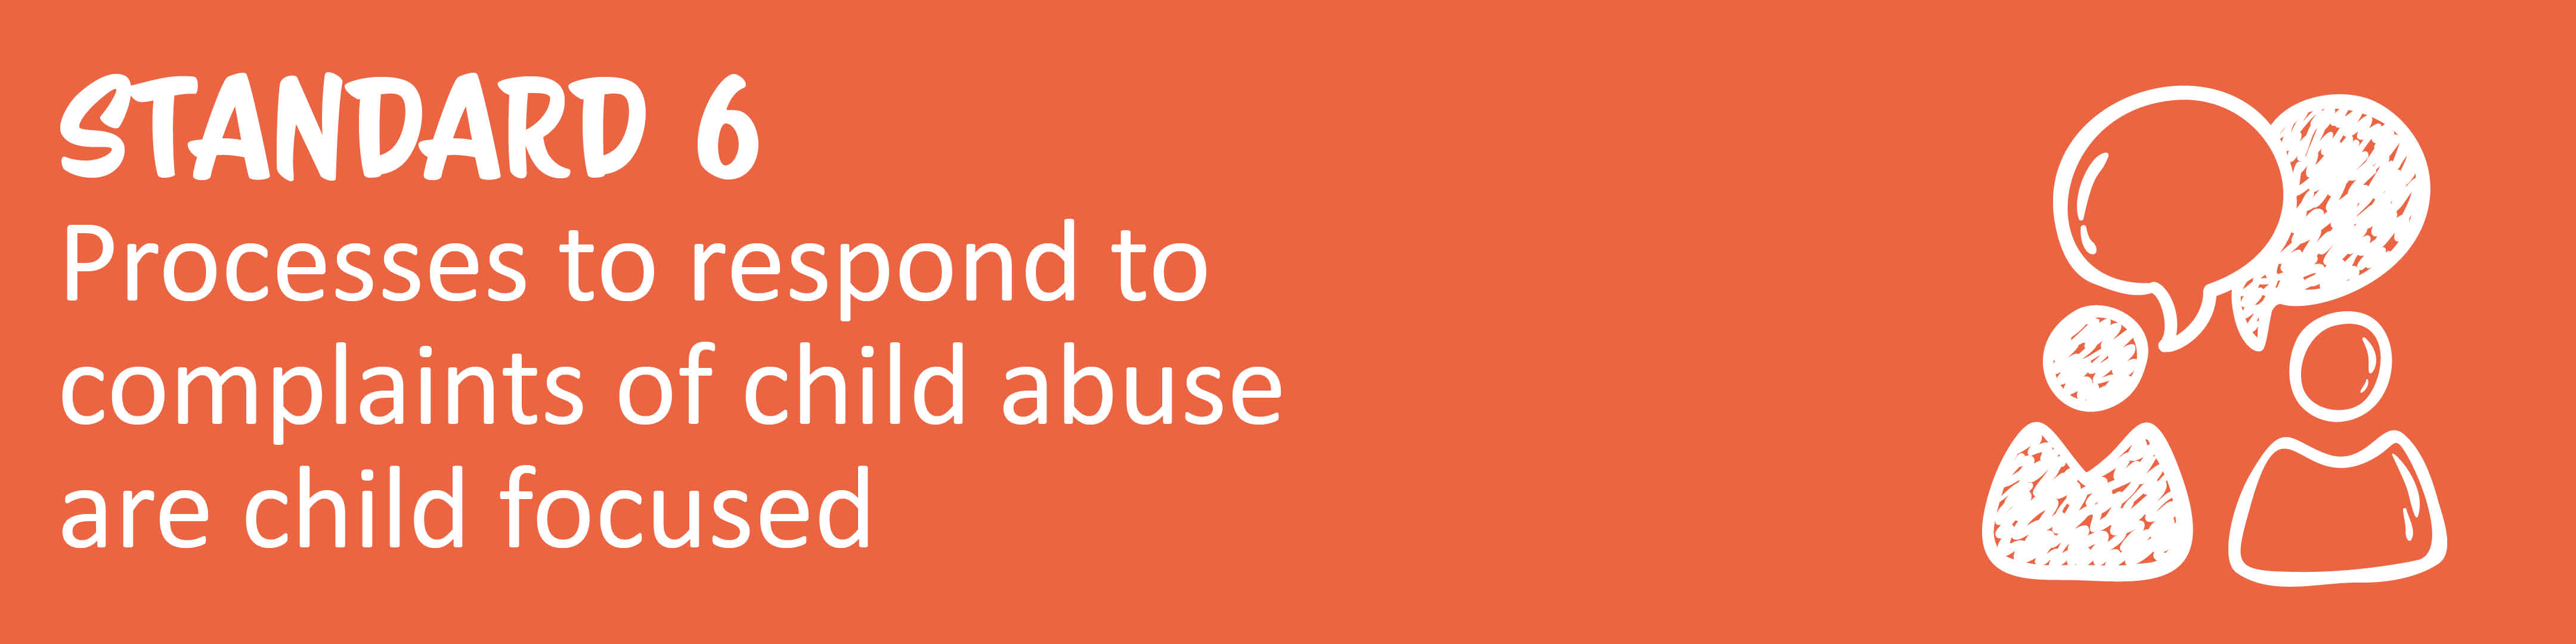 Child Safe Standard 6: Processes to respond to complaints of child abuse are child focused 